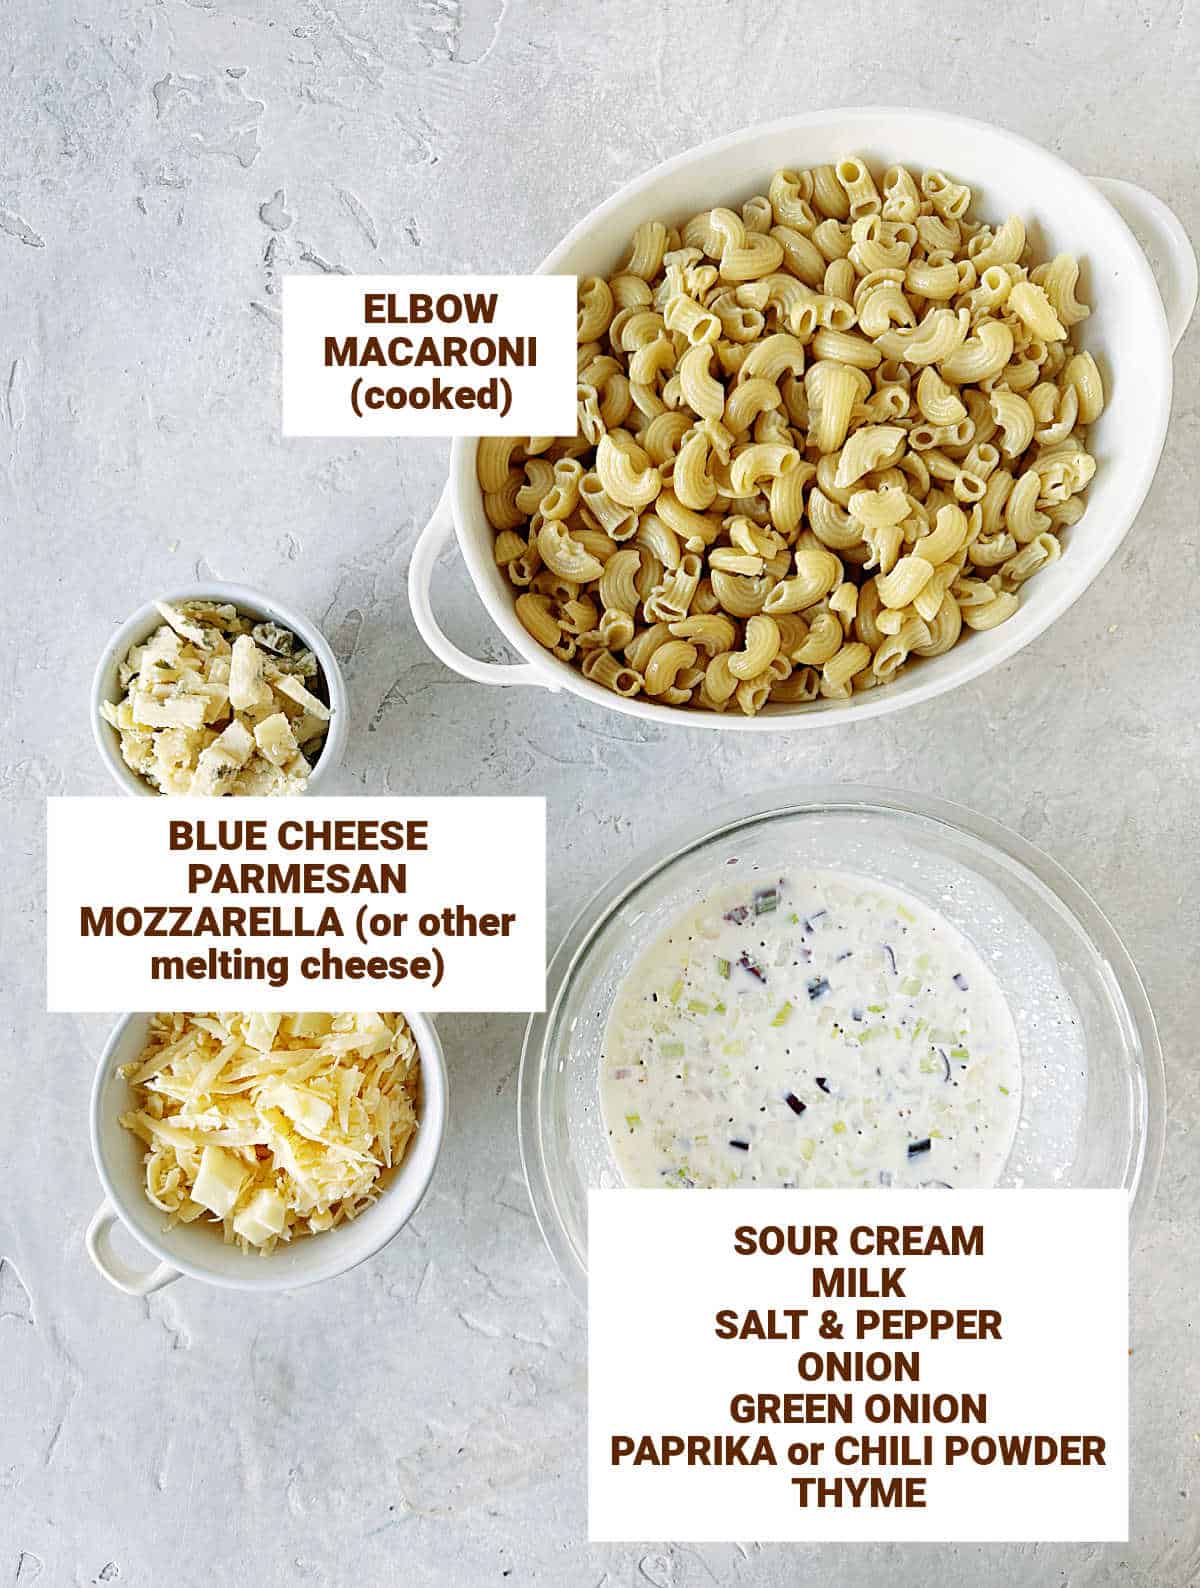 Grey surface with white bowls containing ingredients for blue cheese mac and cheese.